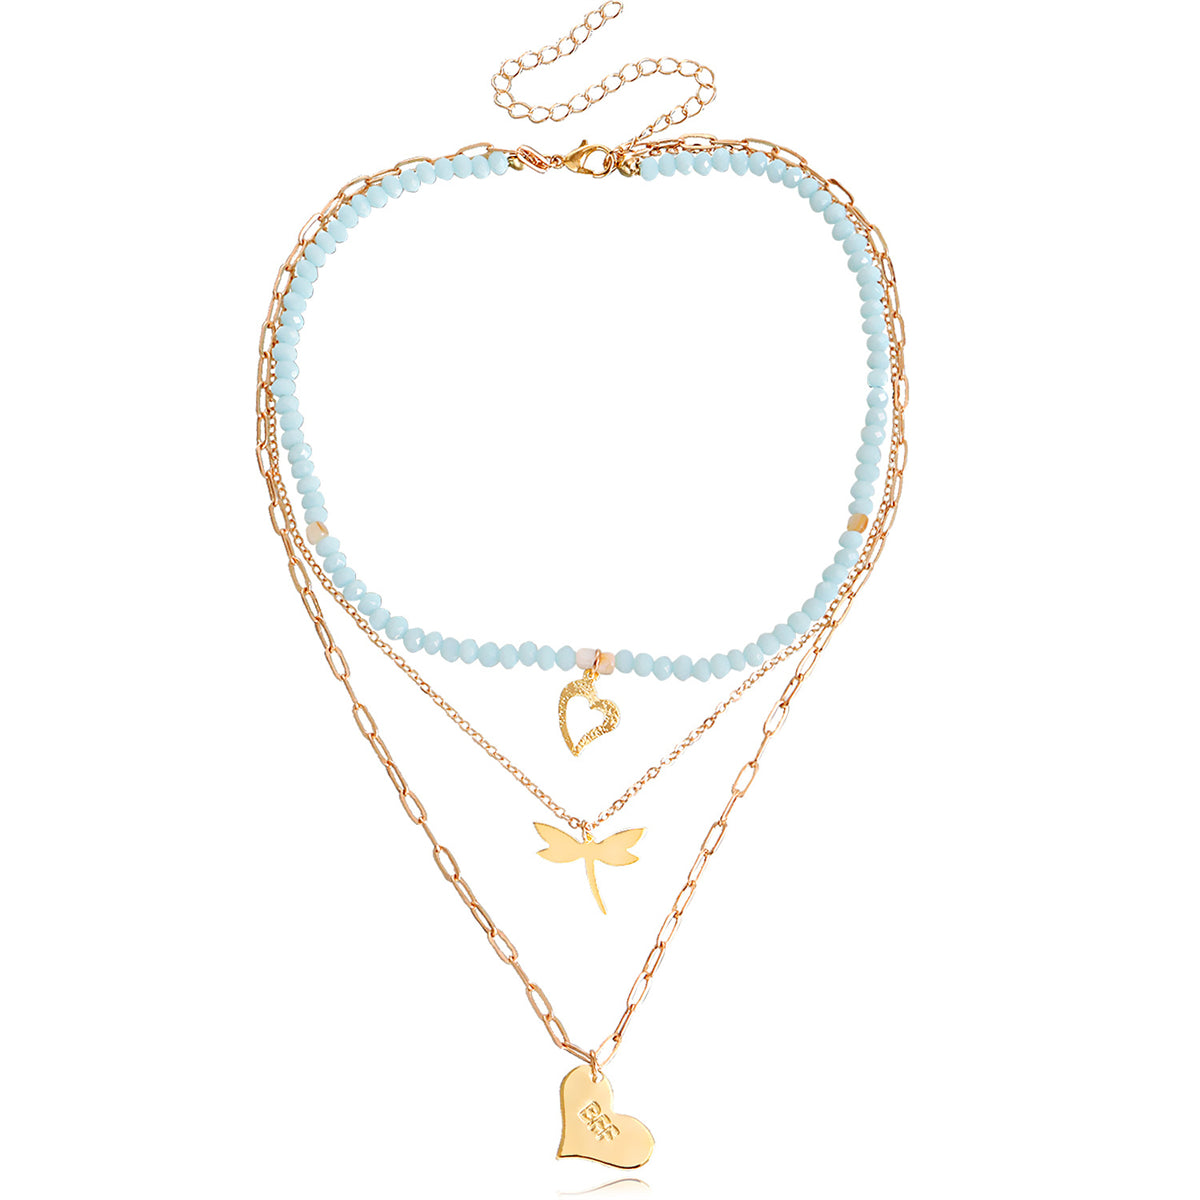 Blue Acrylic & Resin 18K Gold-Plated Dragonfly Heart Layered Pendant Necklace